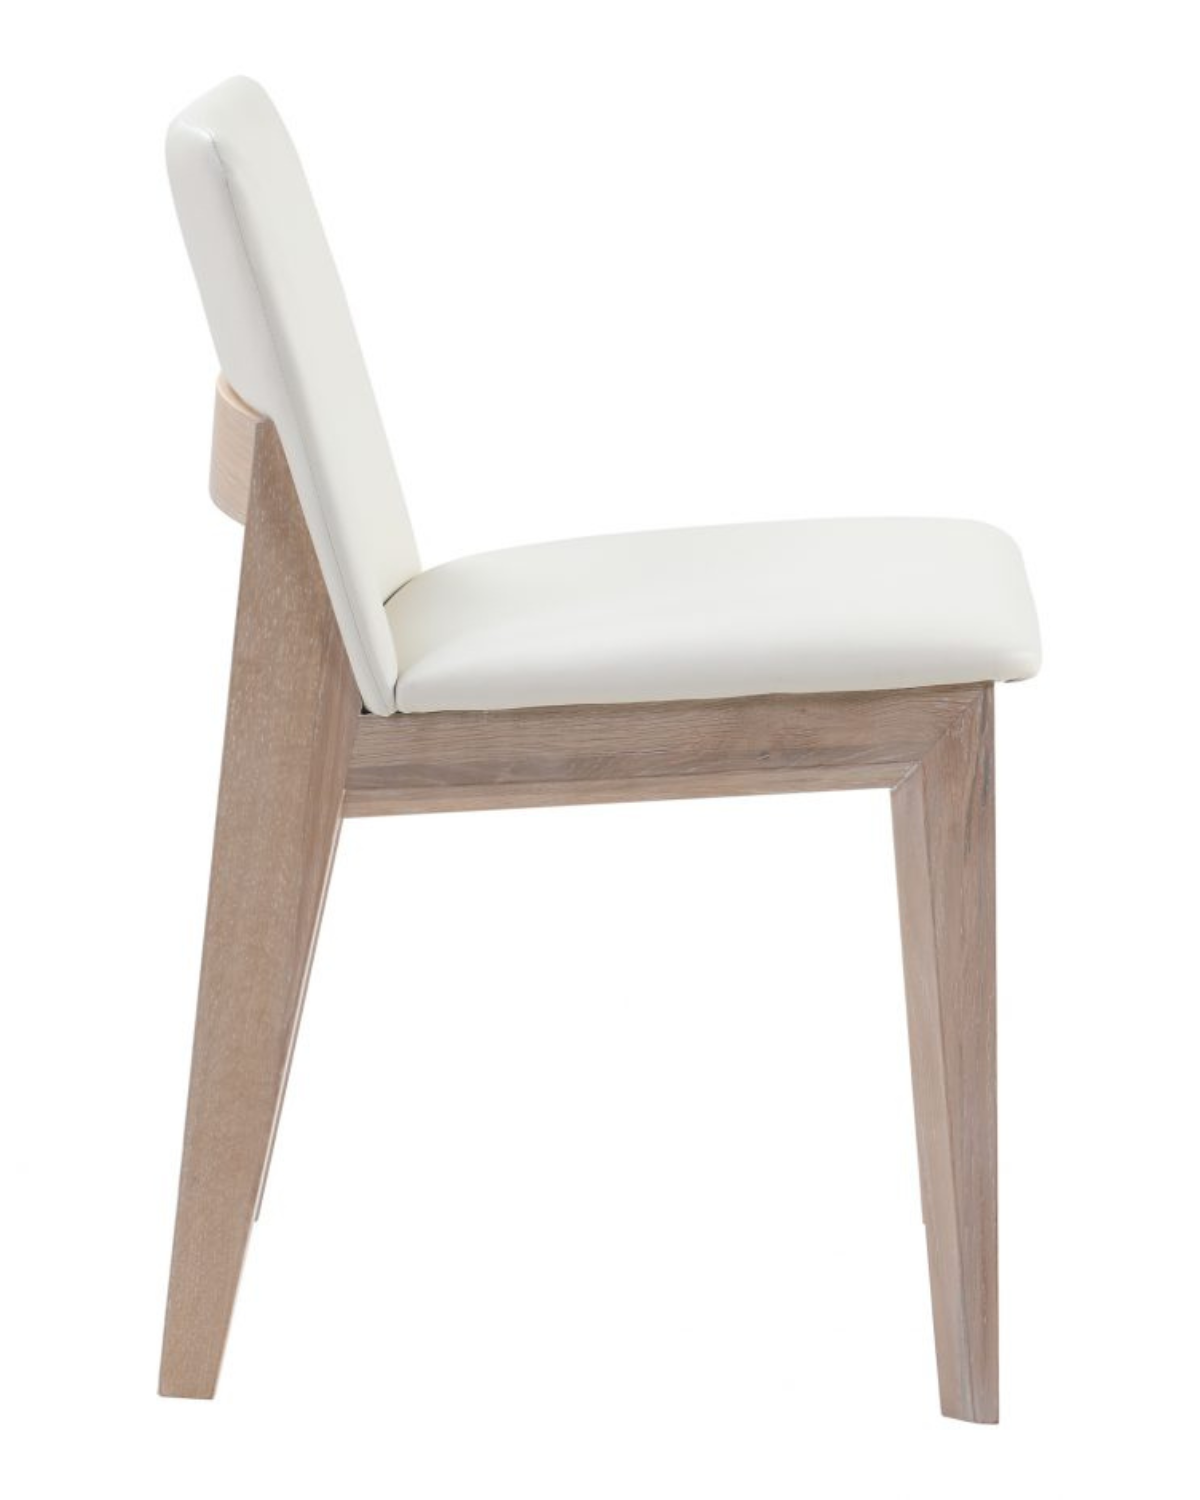 Deco Dining Chair - Leather